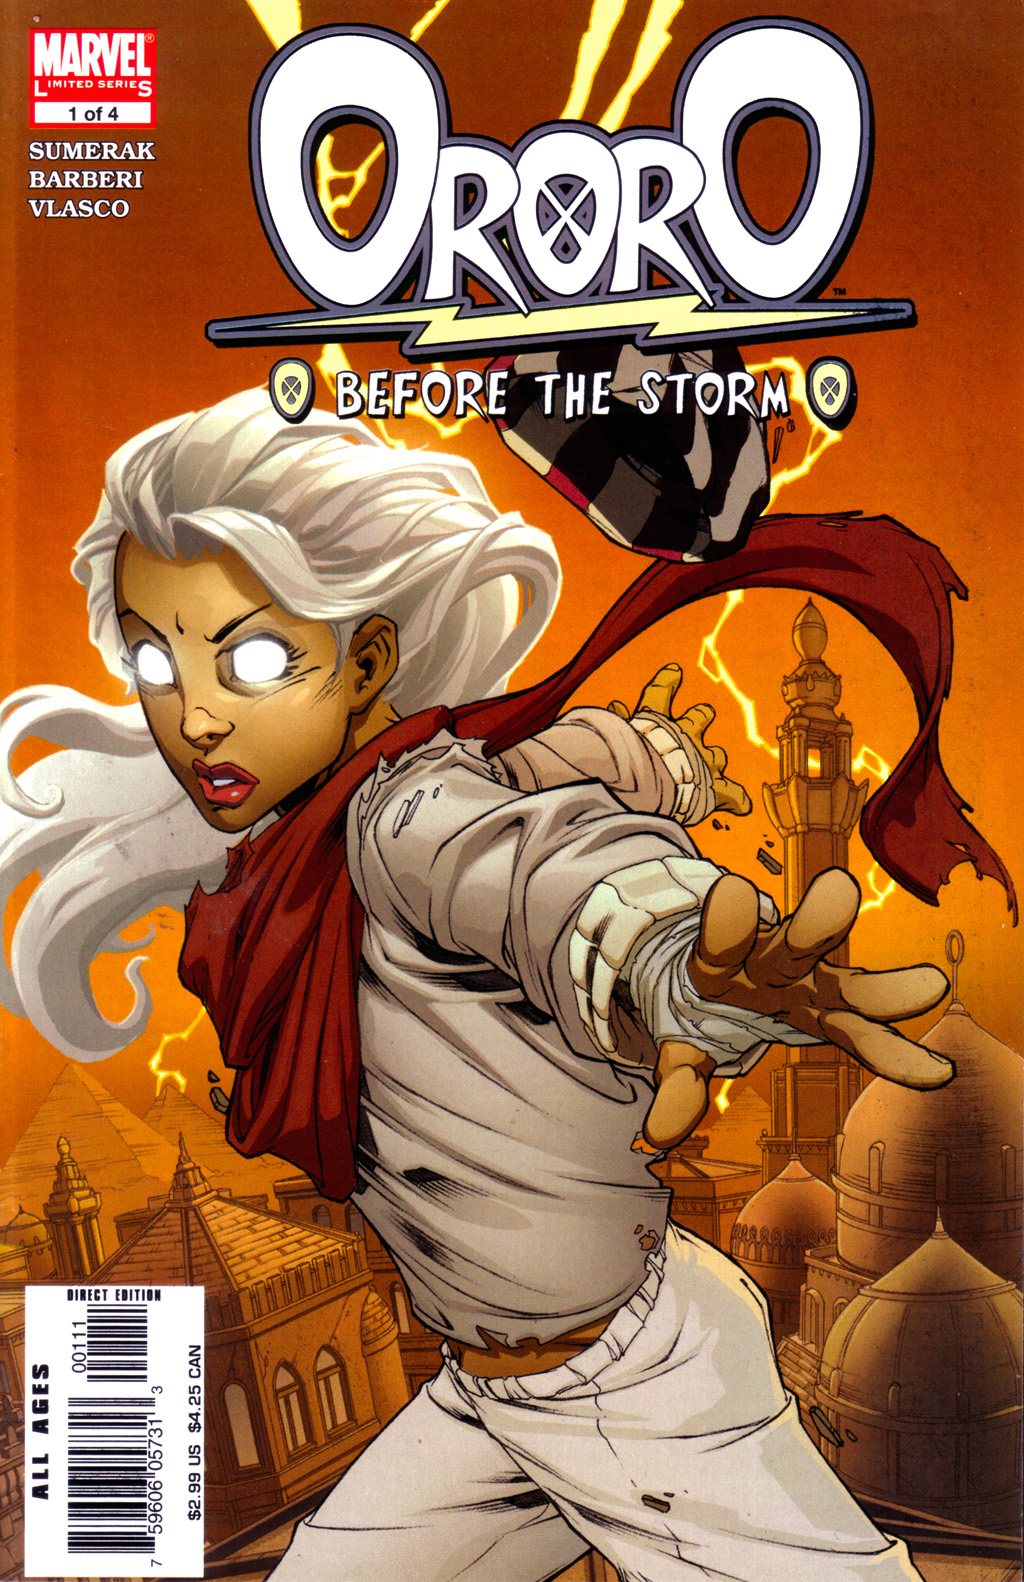 Read online Ororo: Before the Storm comic -  Issue #1 - 1